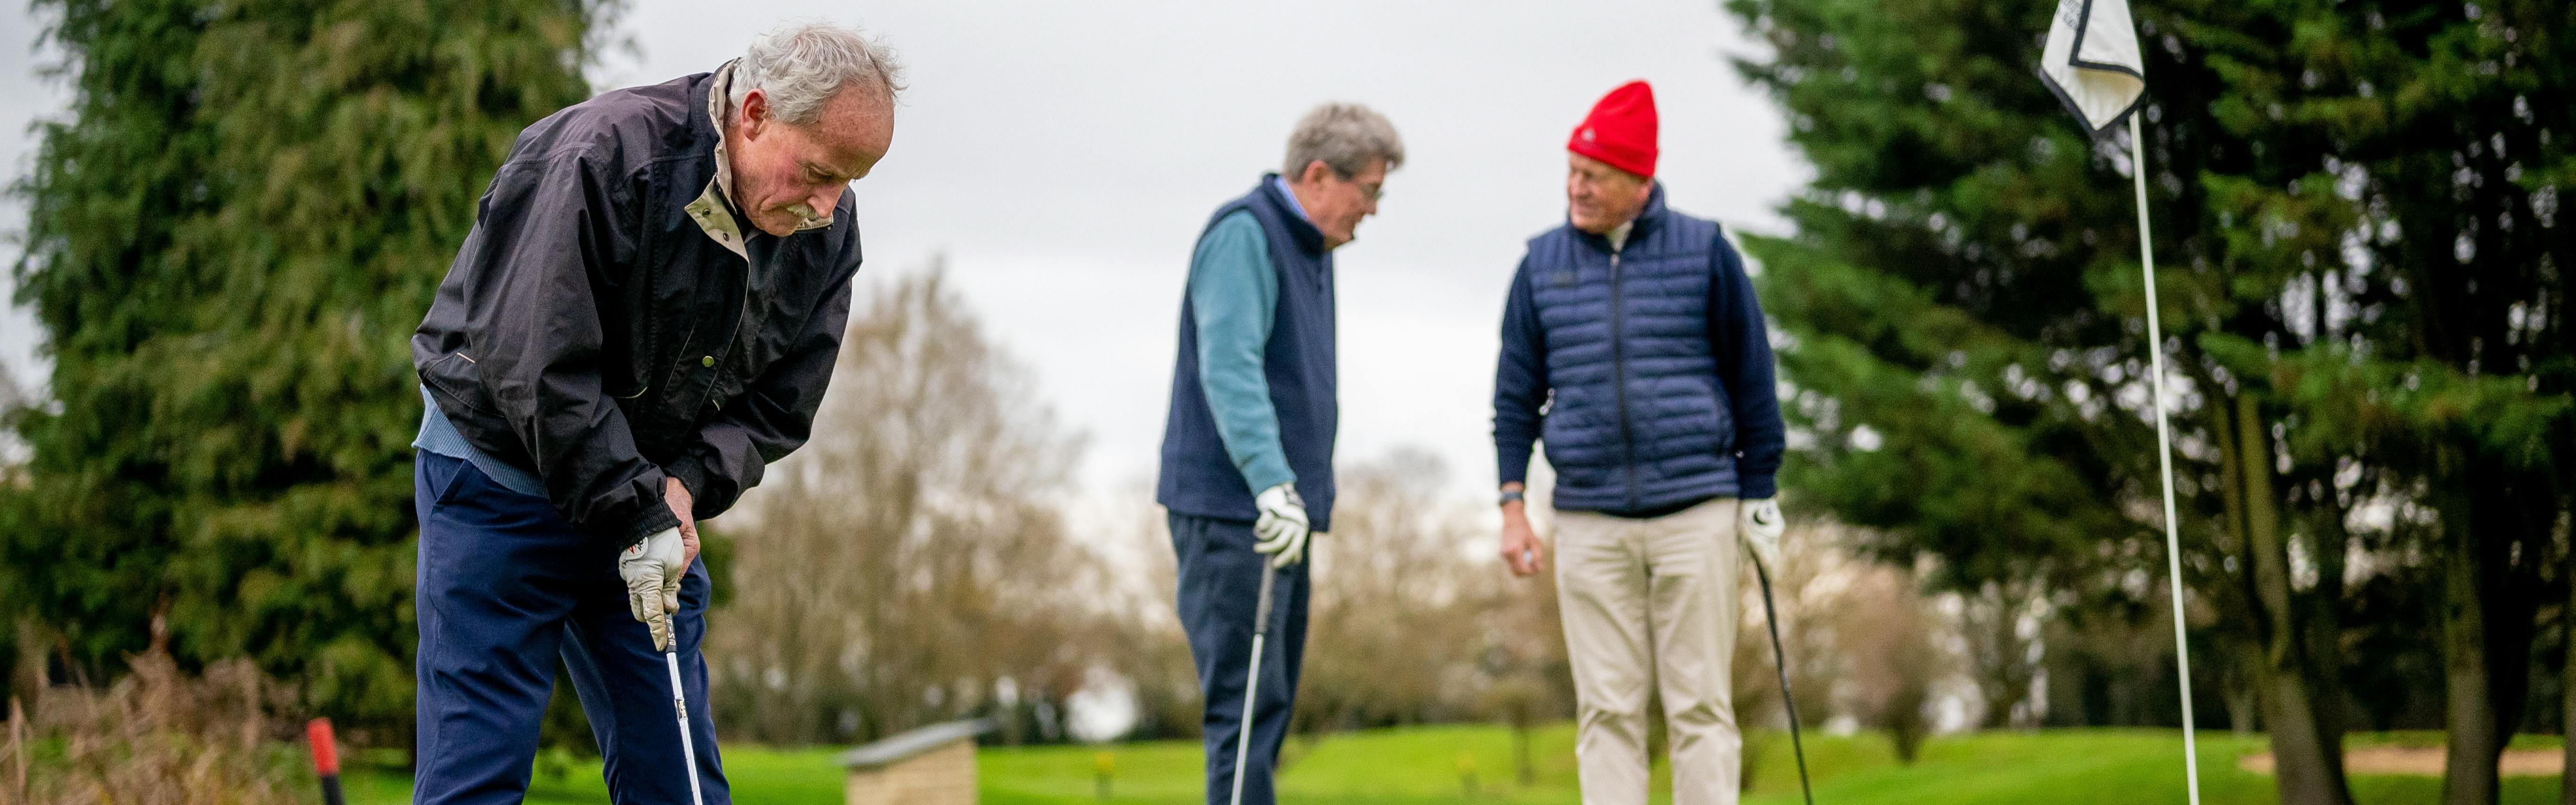 One man lines up to put the ball into the hole as two men stand and talk in the background. 